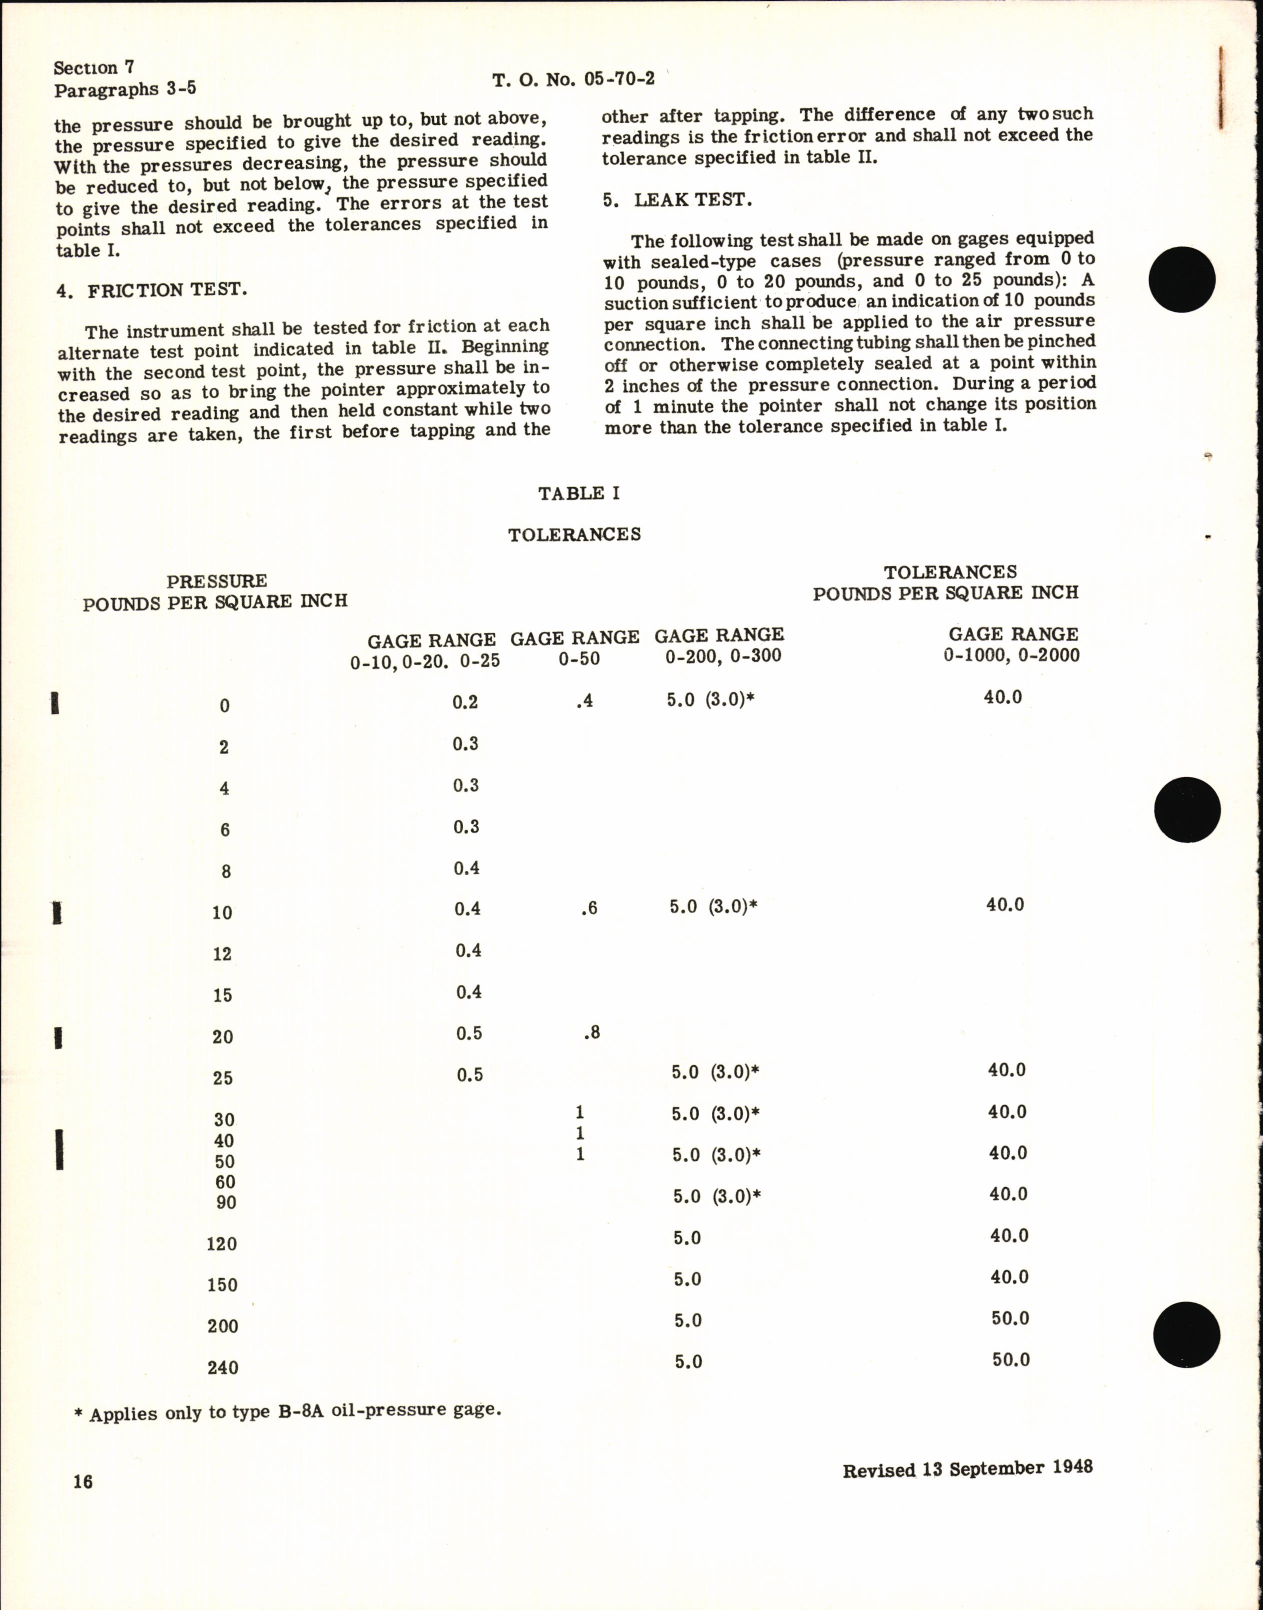 Sample page 8 from AirCorps Library document: Operation, Service, & Overhaul Instructions for Pressure Gages